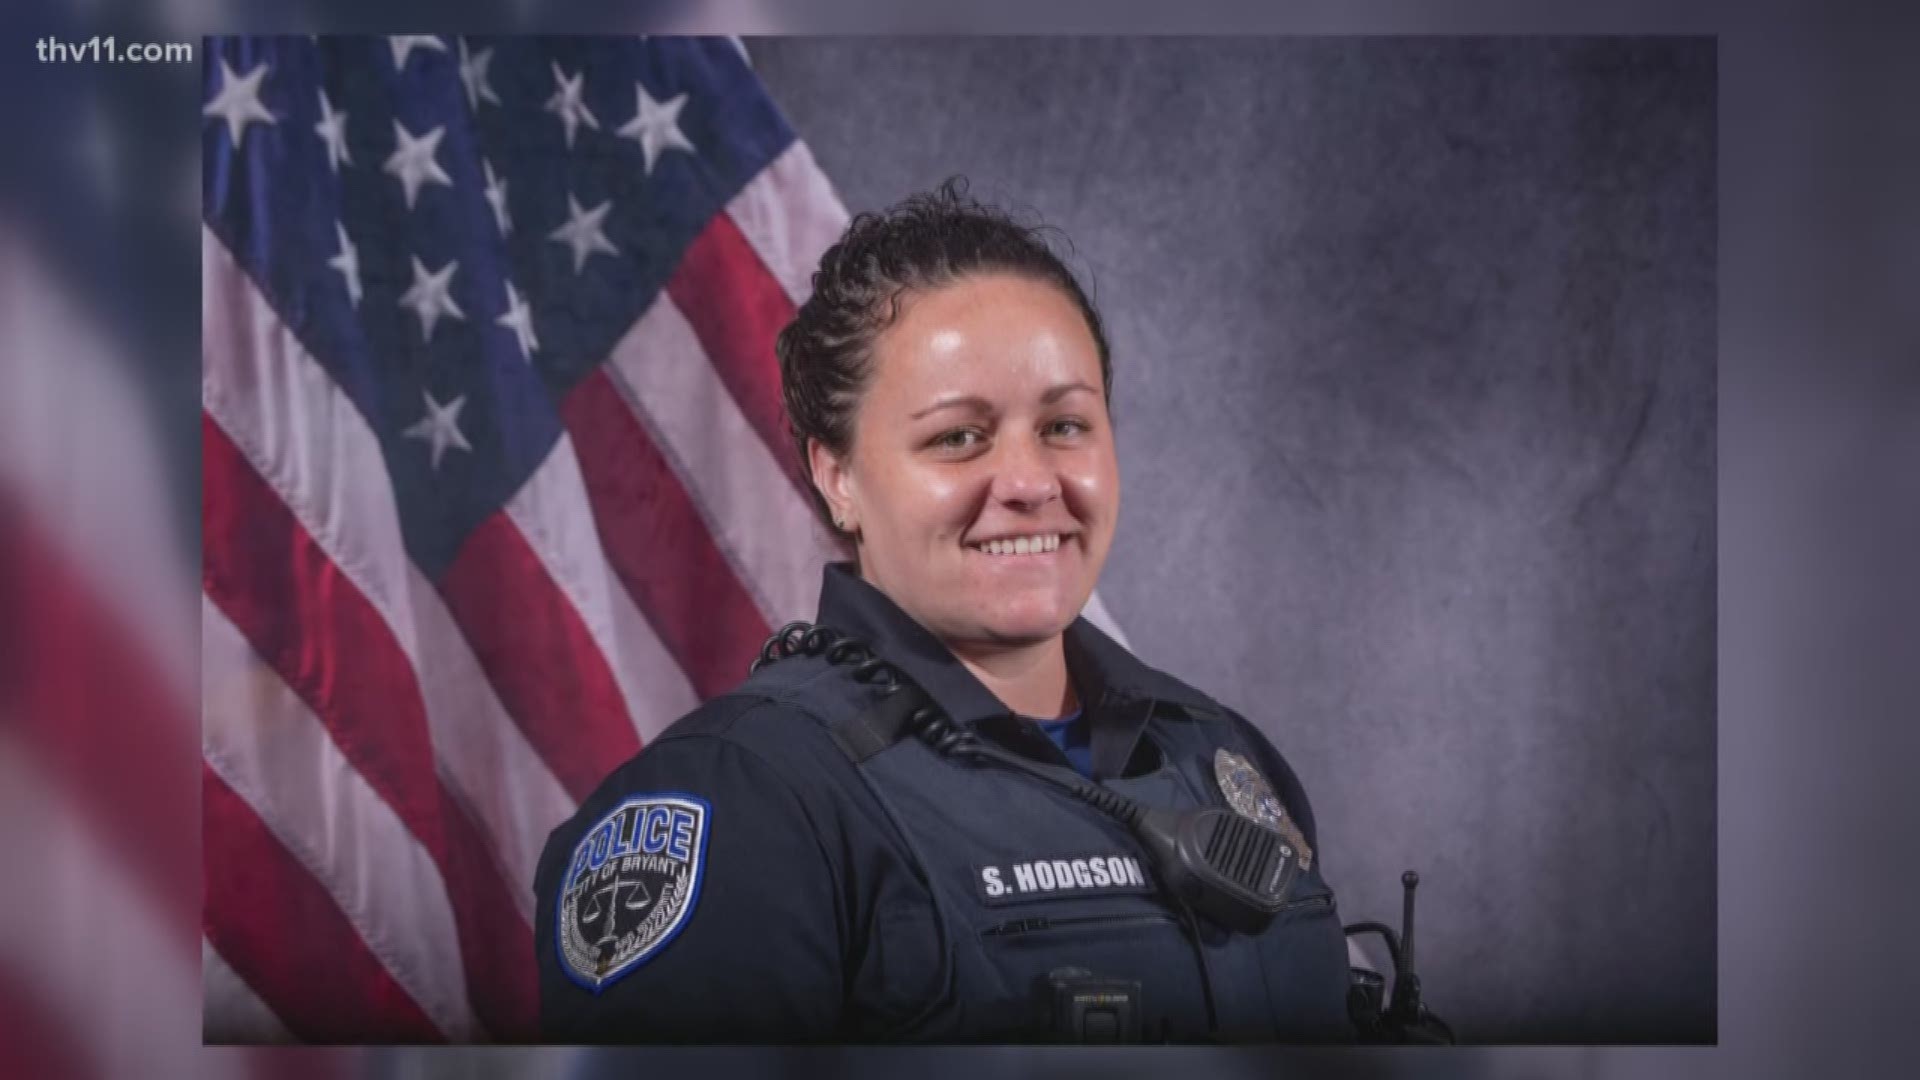 The Bryant community is standing by Officer Samantha Hodgson after she was shot and injured in the line of duty Monday night.